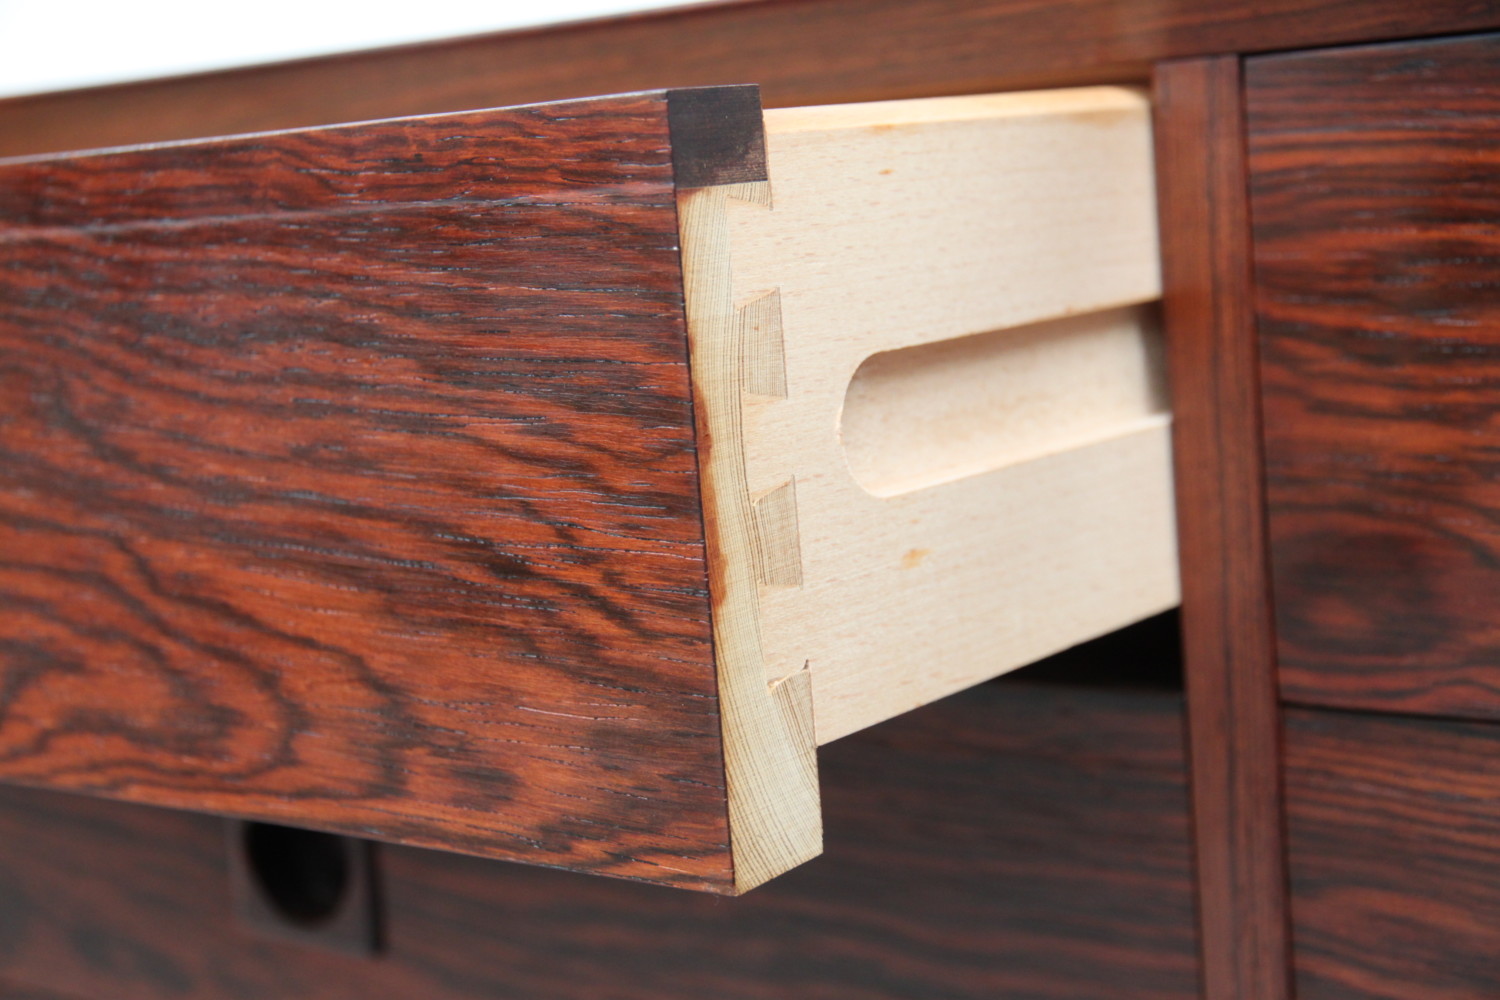 Rosewood Chest Of Drawers